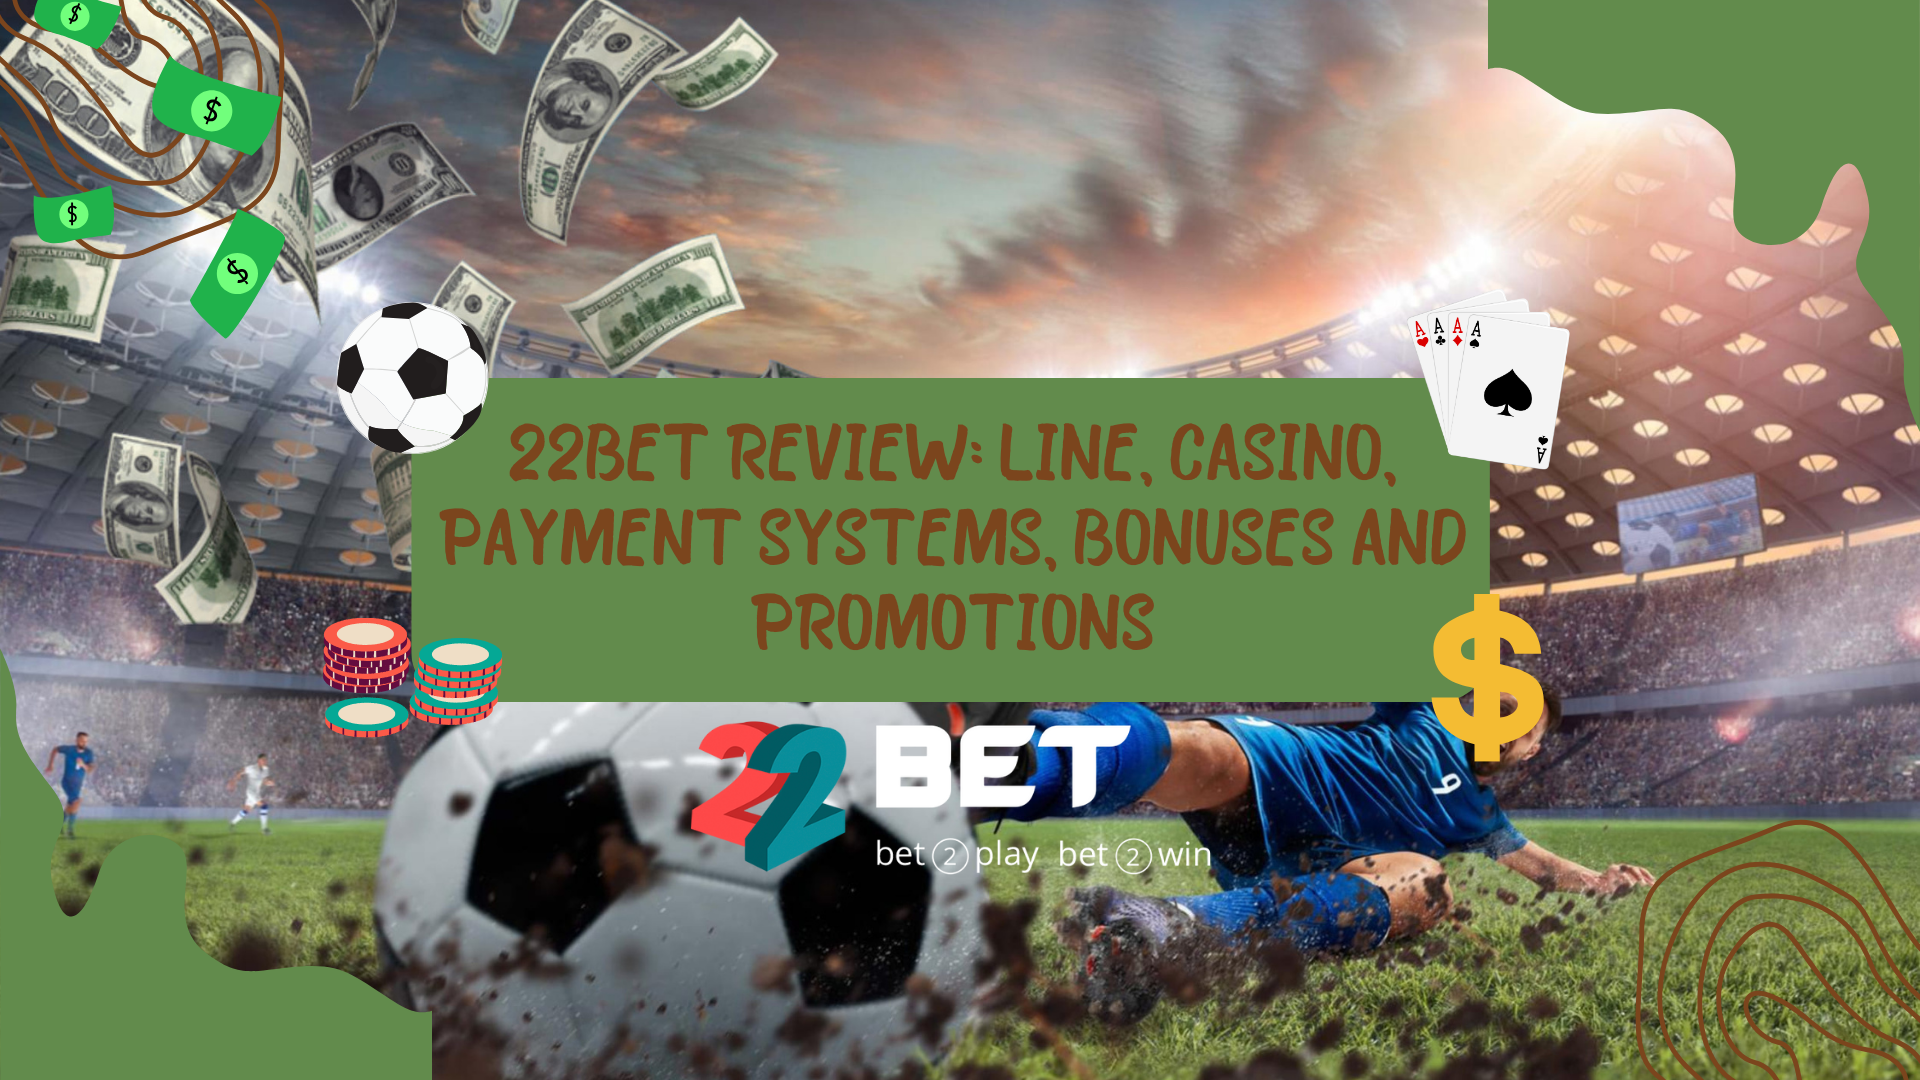 22bet Review: line, casino, payment systems, bonuses and promotions 